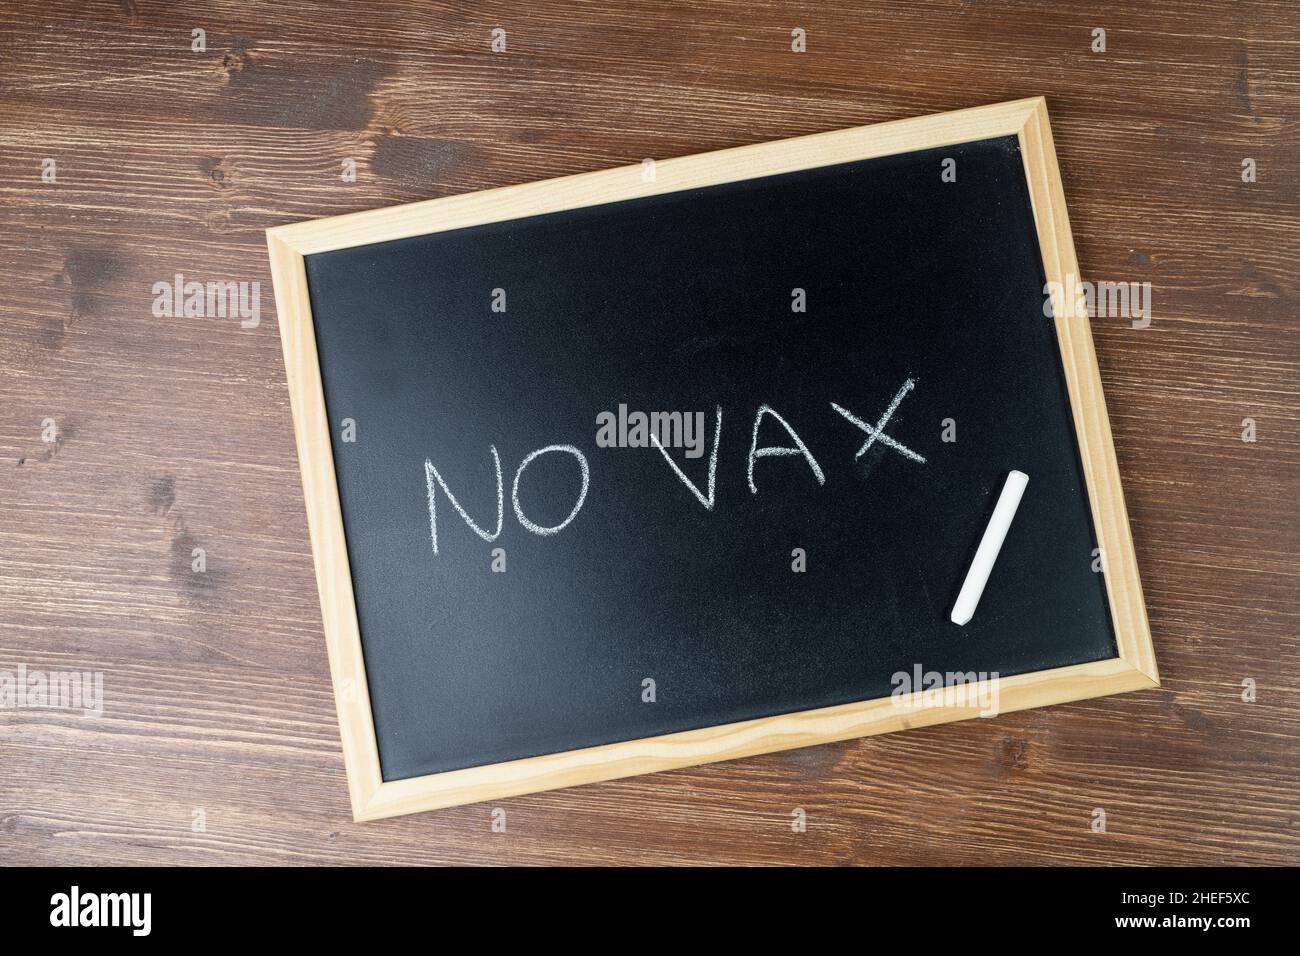 the phrase No vax written with chalk on a blackboard Stock Photo